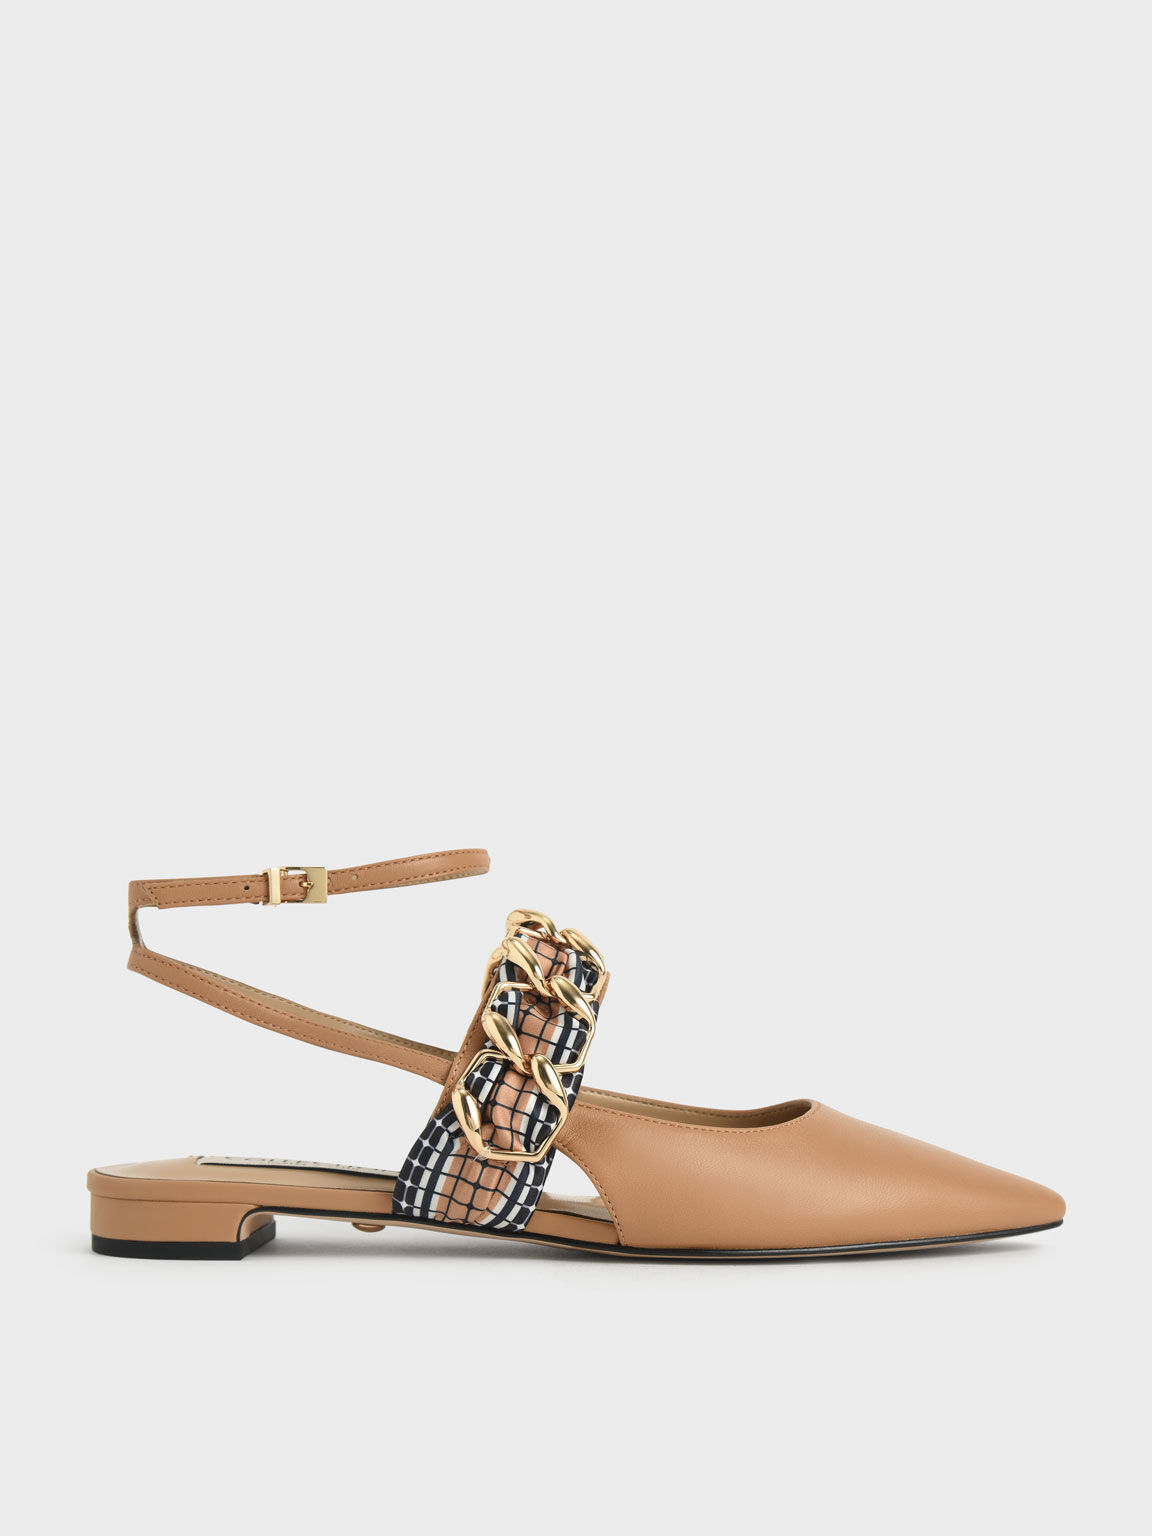 Printed Fabric Scarf Leather Ballet Pumps, Caramel, hi-res